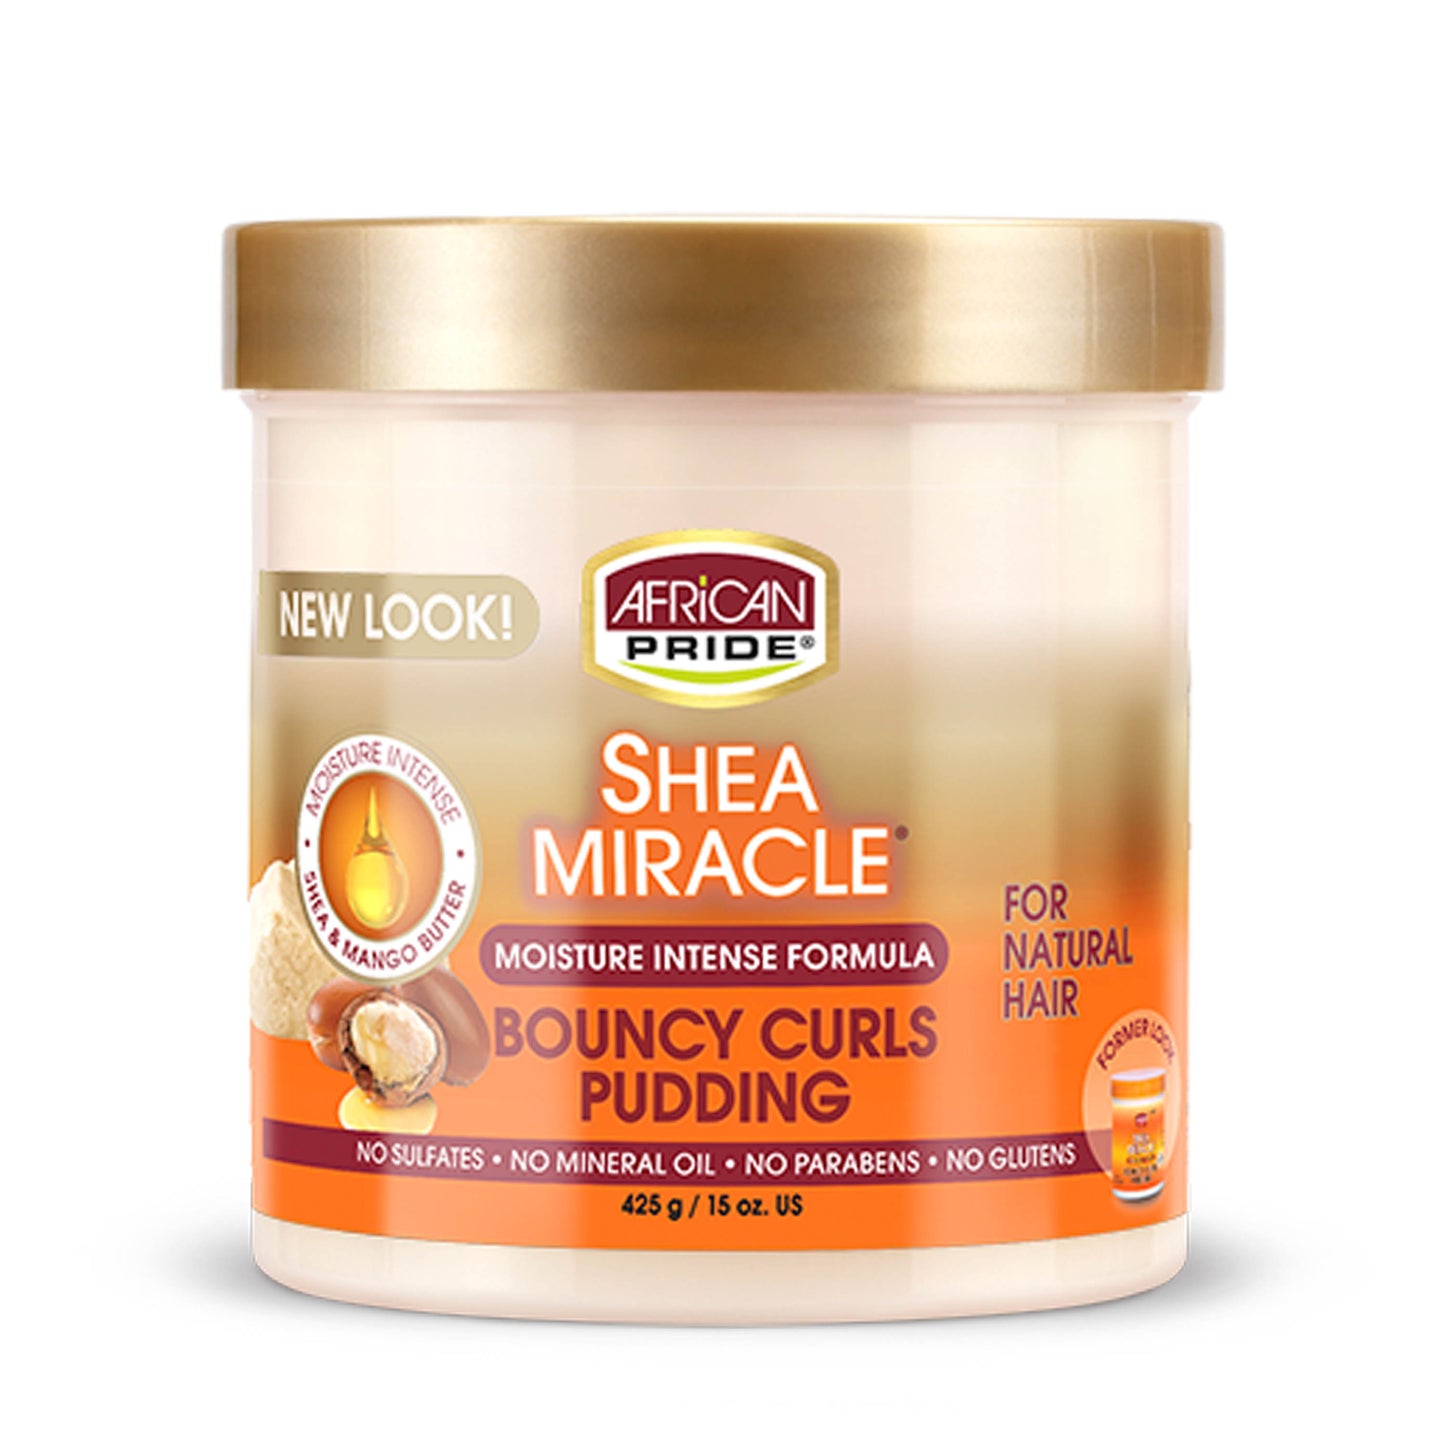 Shea Miracle Bouncy Curls Pudding 15 oz.